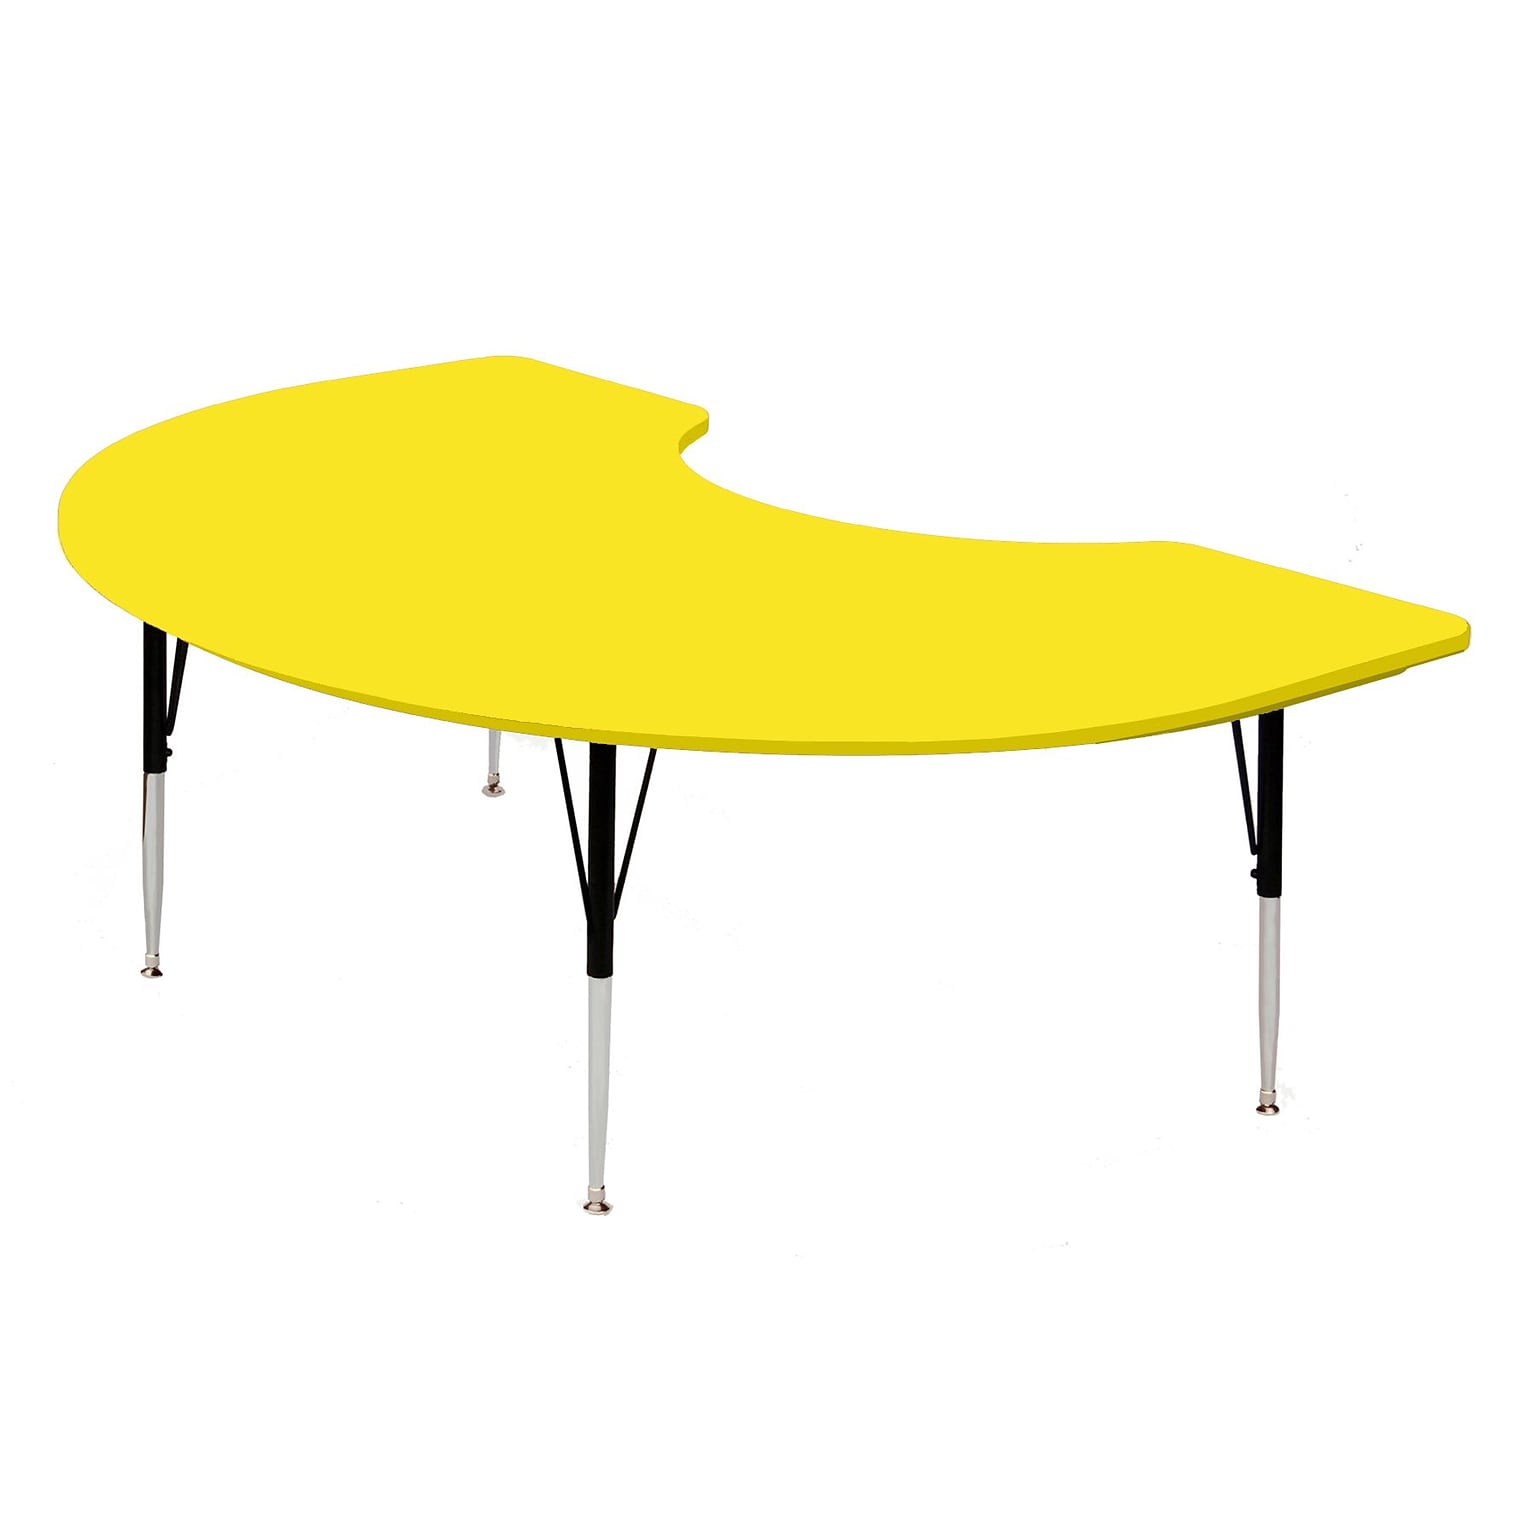 Correll® 48D x 72L Kidney Shaped Heavy Duty Plastic Activity Table; Yellow Top